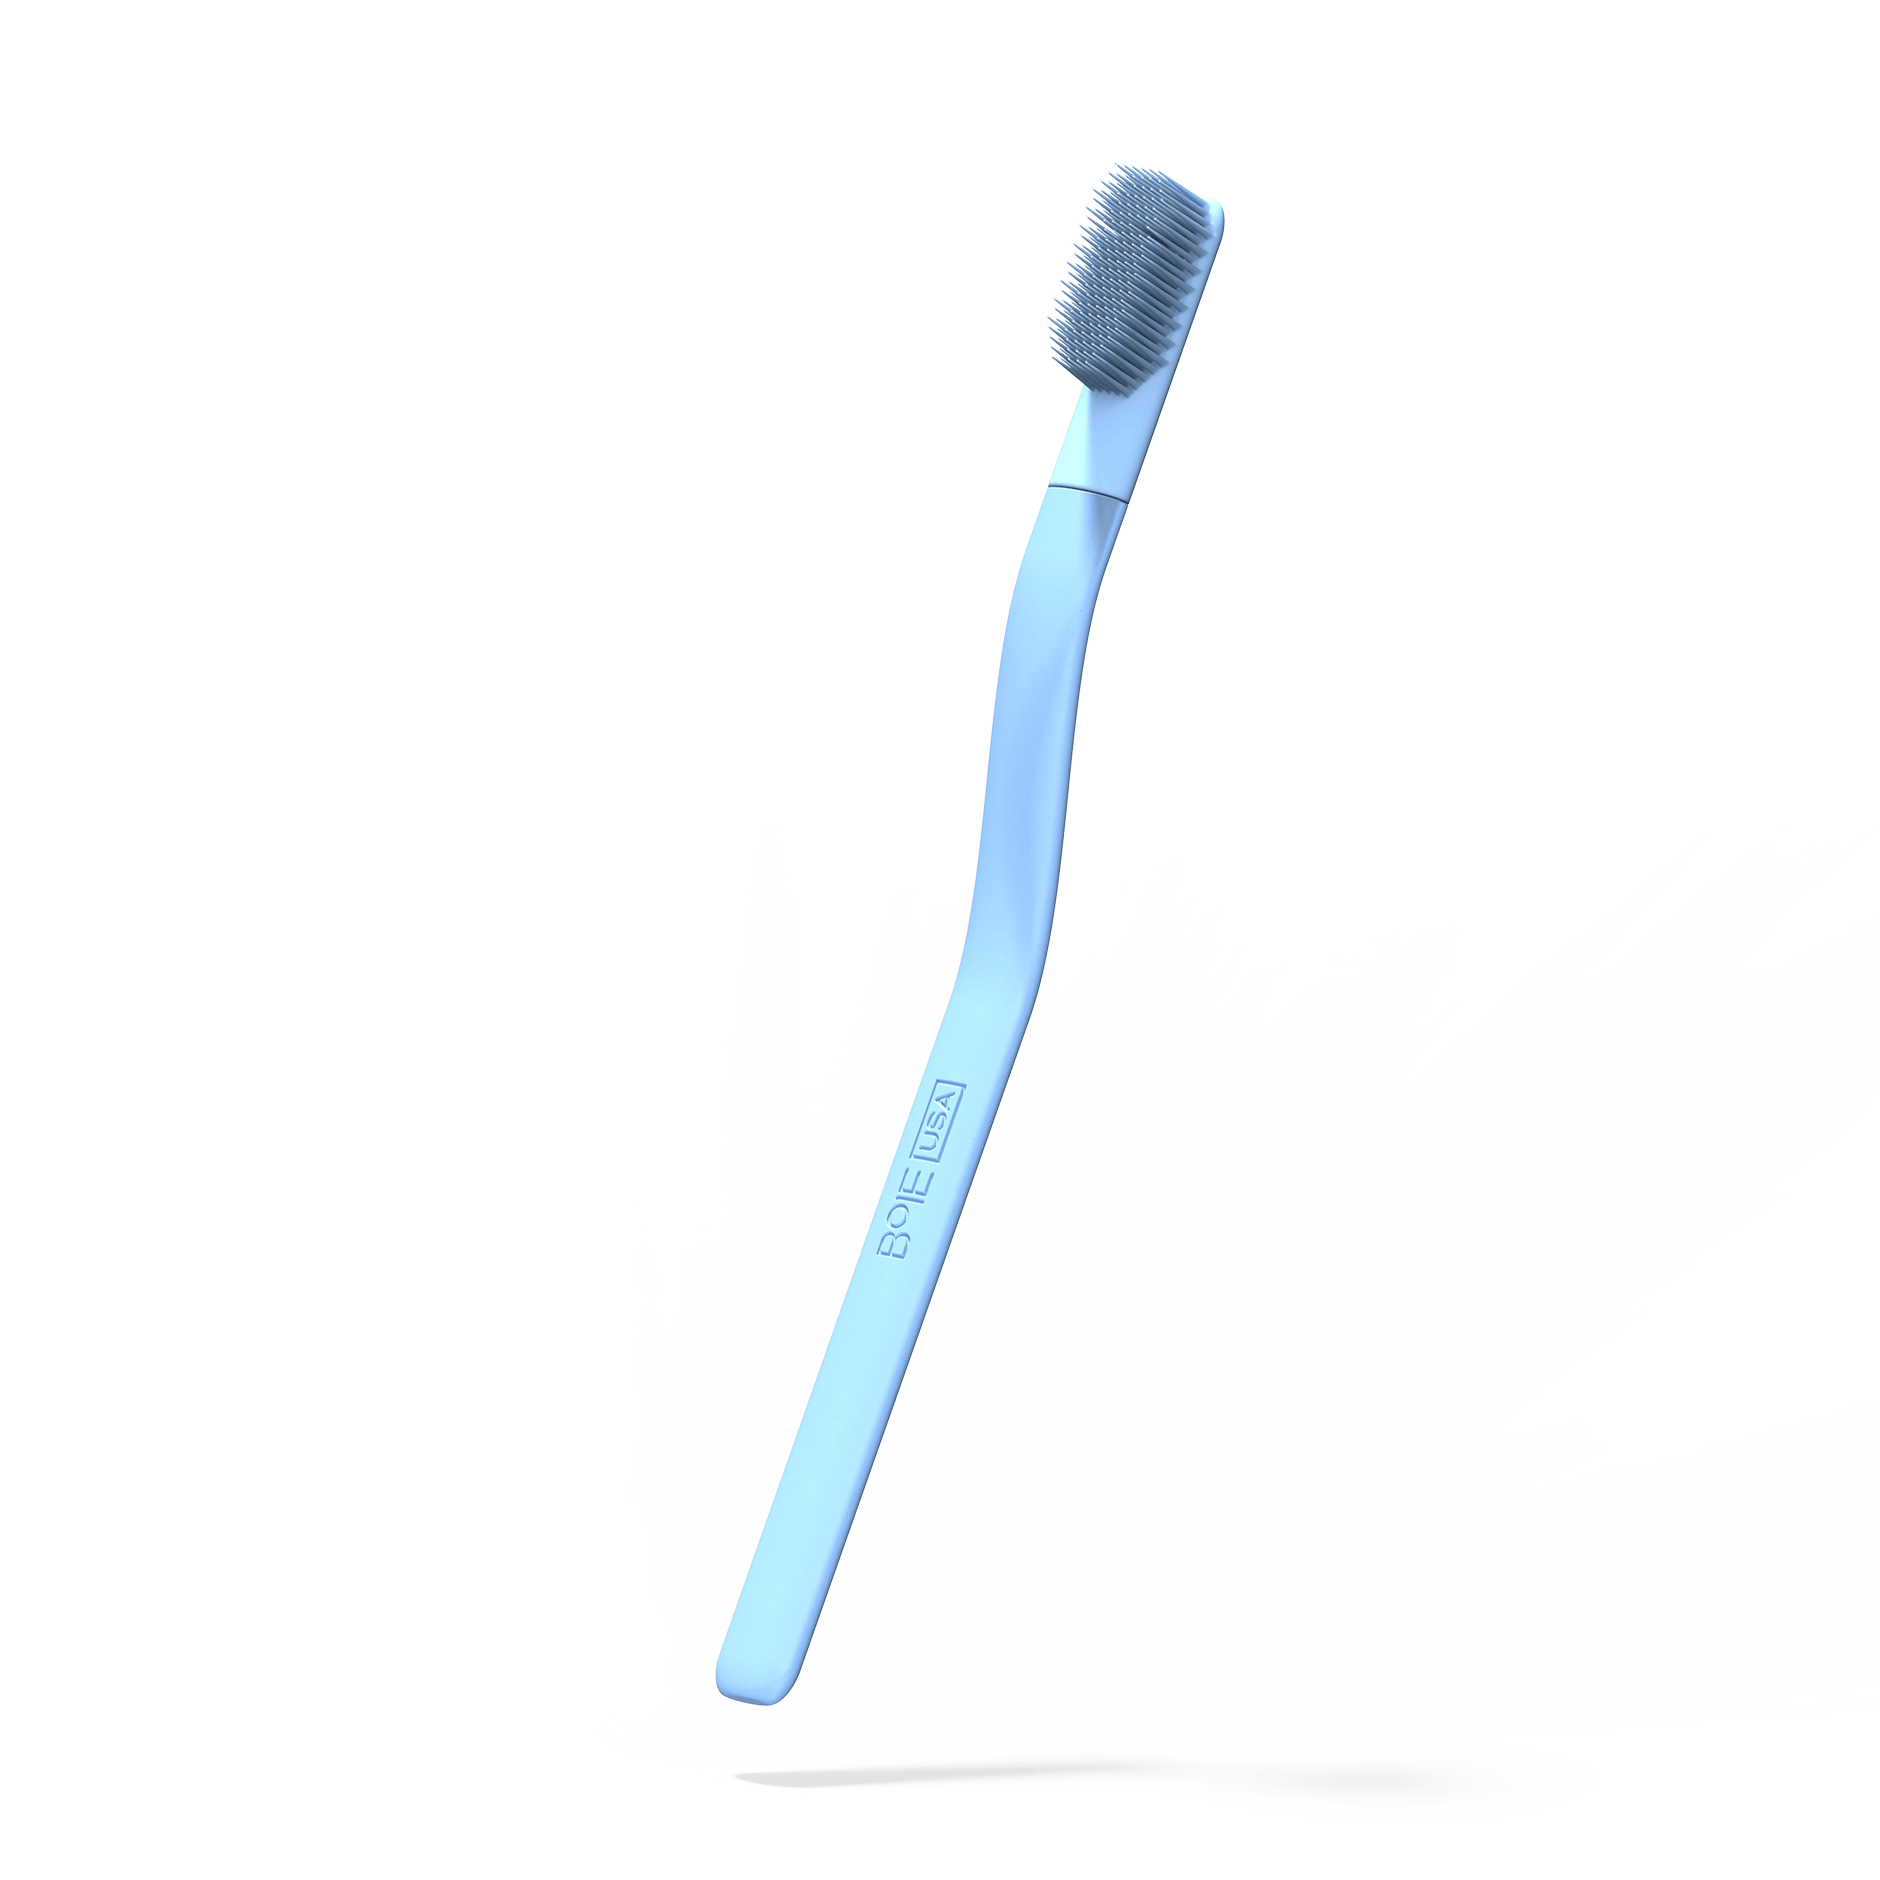 Fine Toothbrush in Blue